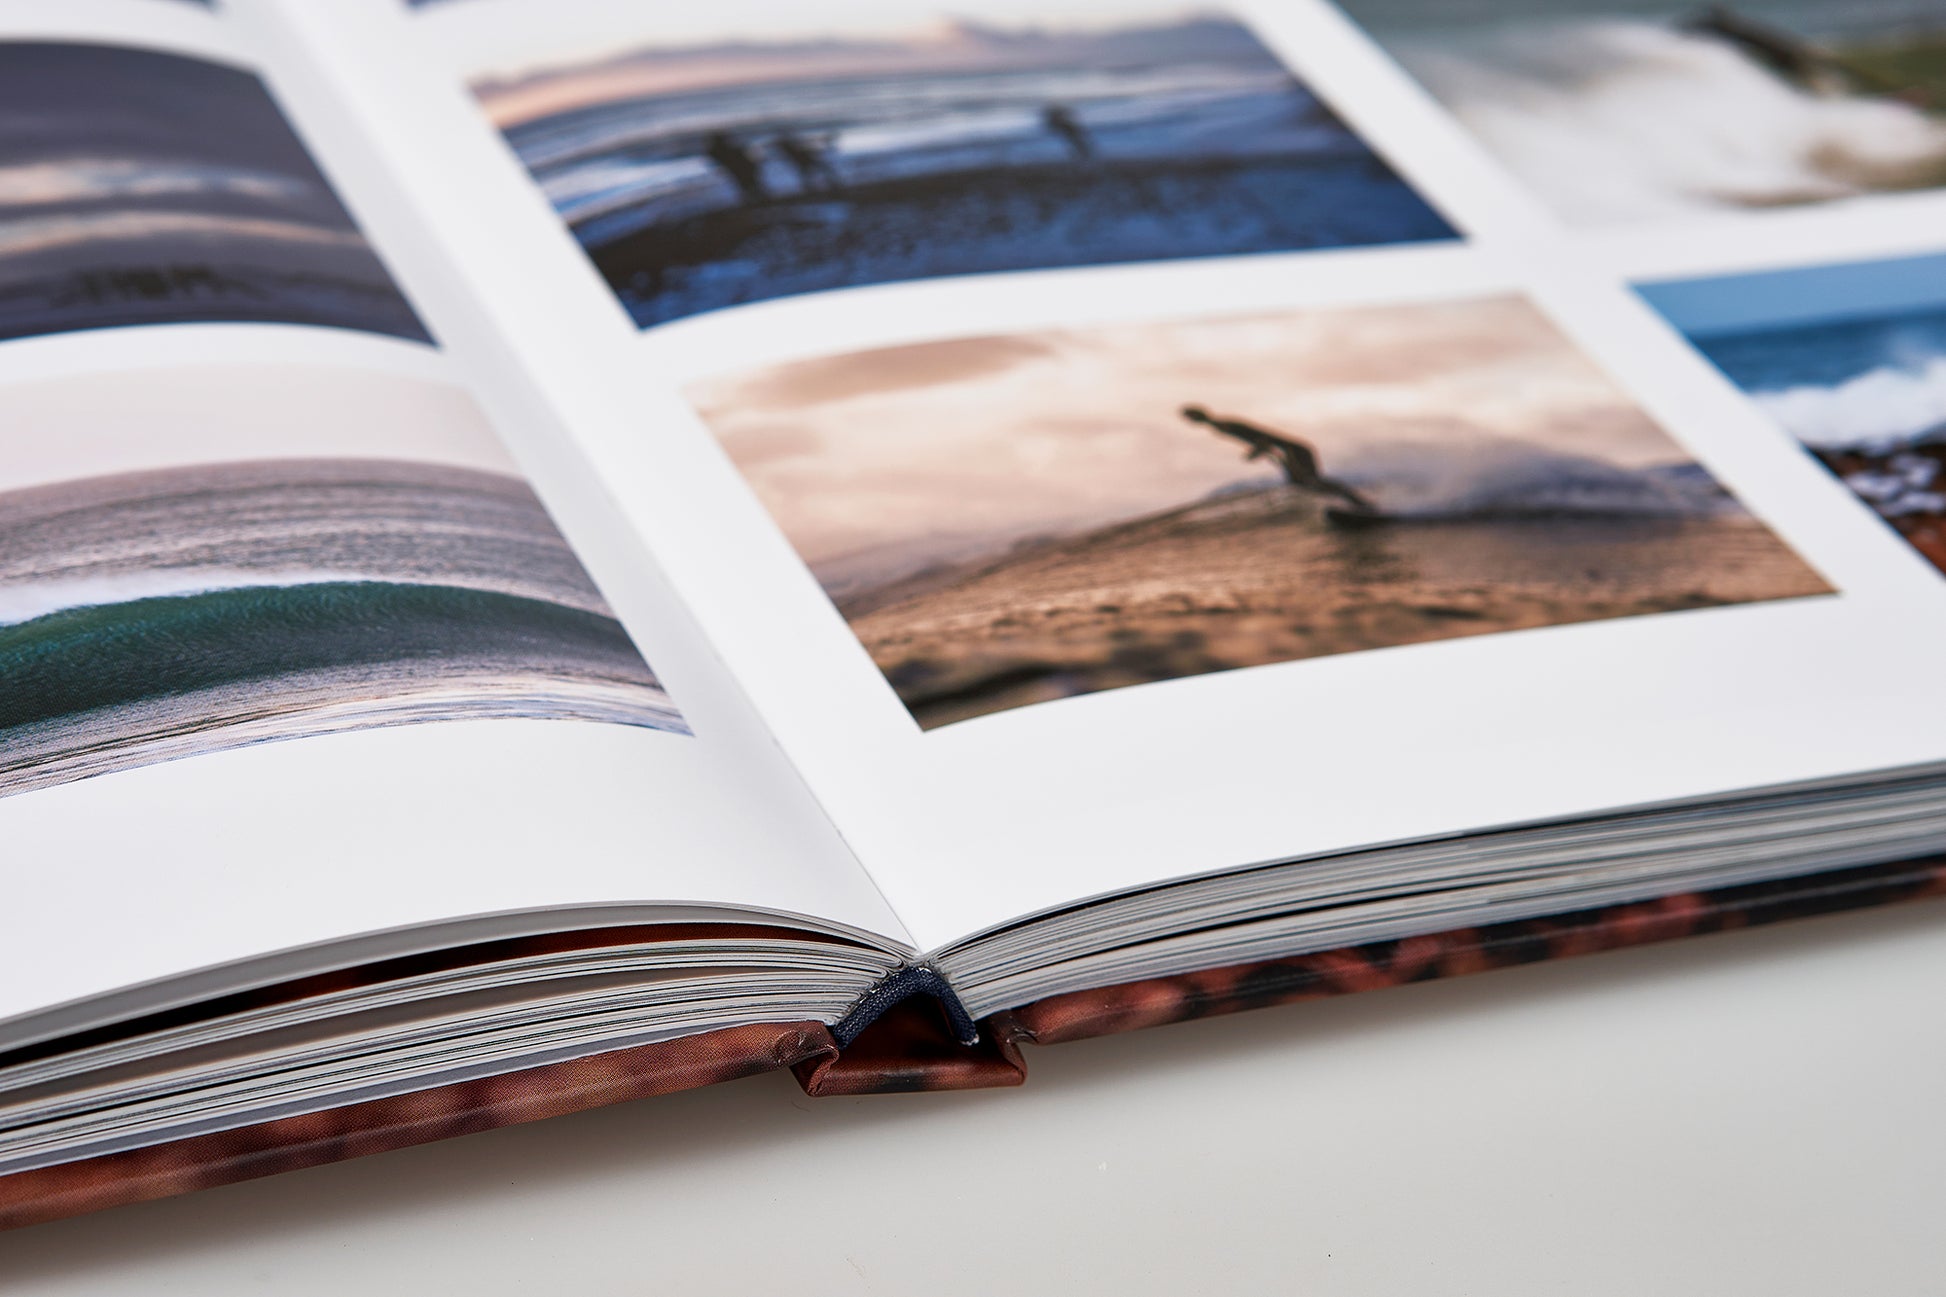 Island X- A photography book by Mark McInnis- Standard edition close up on spine of the book.